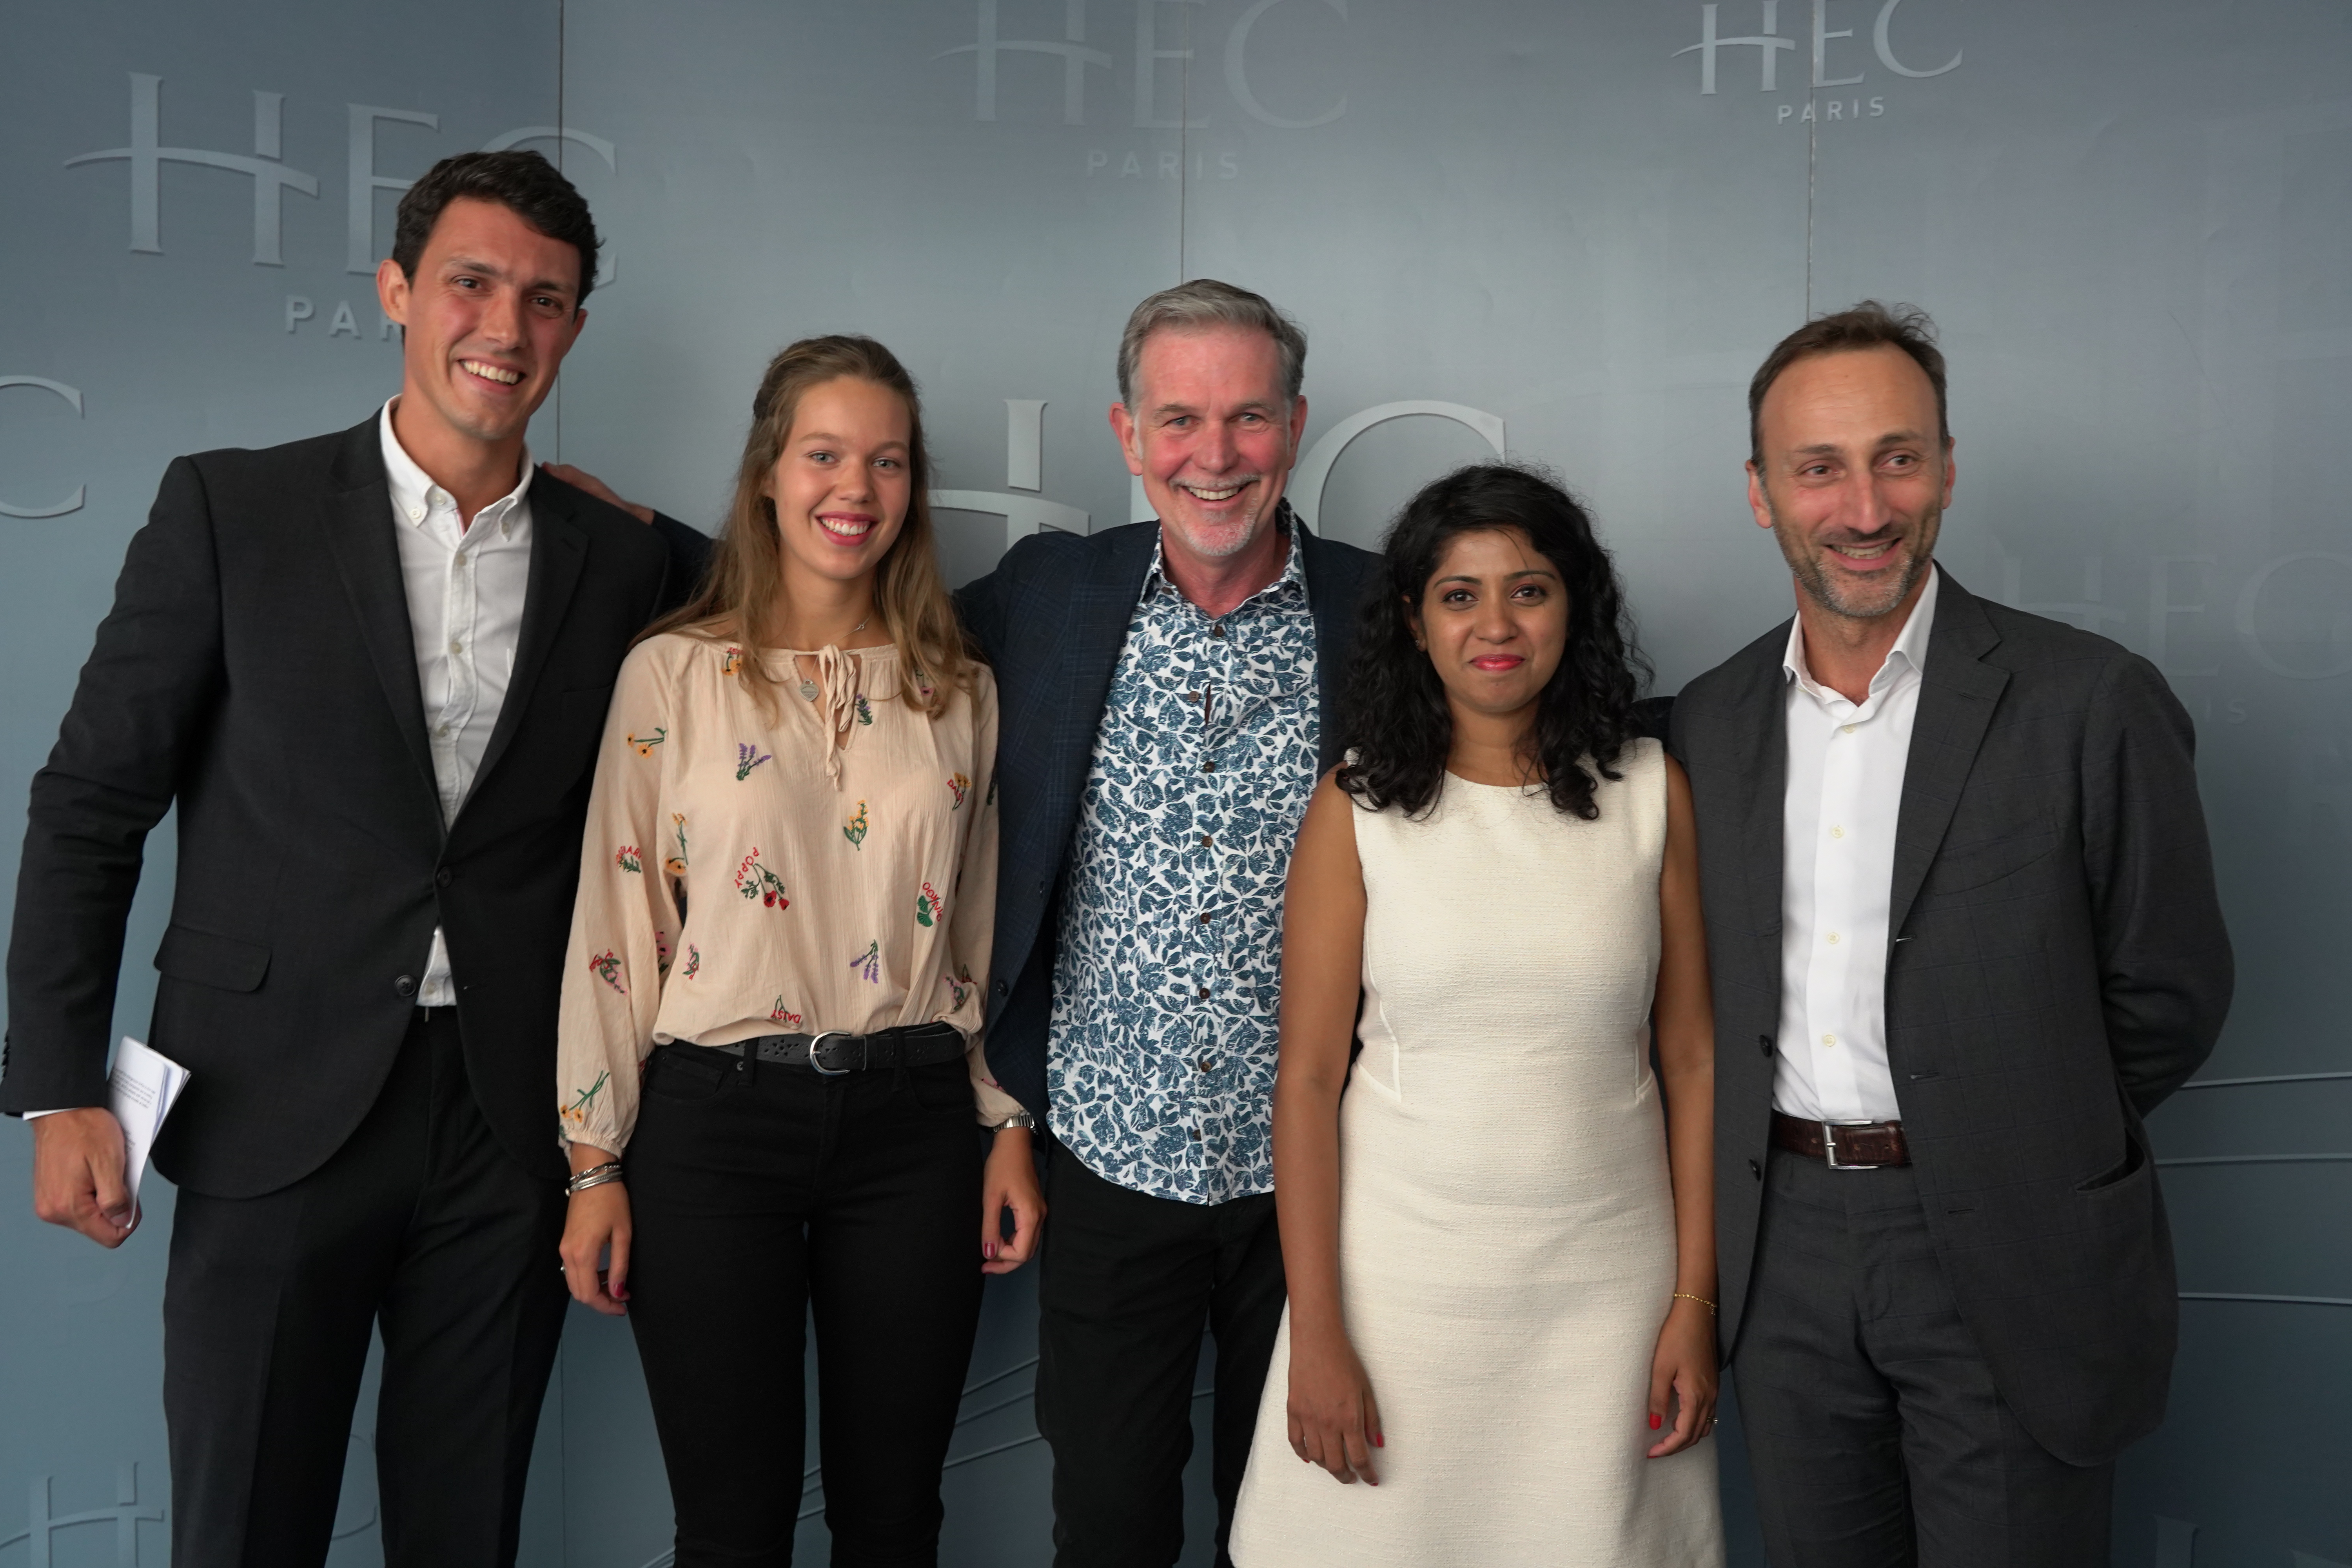 From left: The MBA's General Management and Leadership Club President Arnaud Steinfels, HEC Débats President Rozenn Révois, Netflix CEO Reed Hastings, EMBA candidate Agnès Ignace, and the MBA Programs Associate Dean Andrea Masini